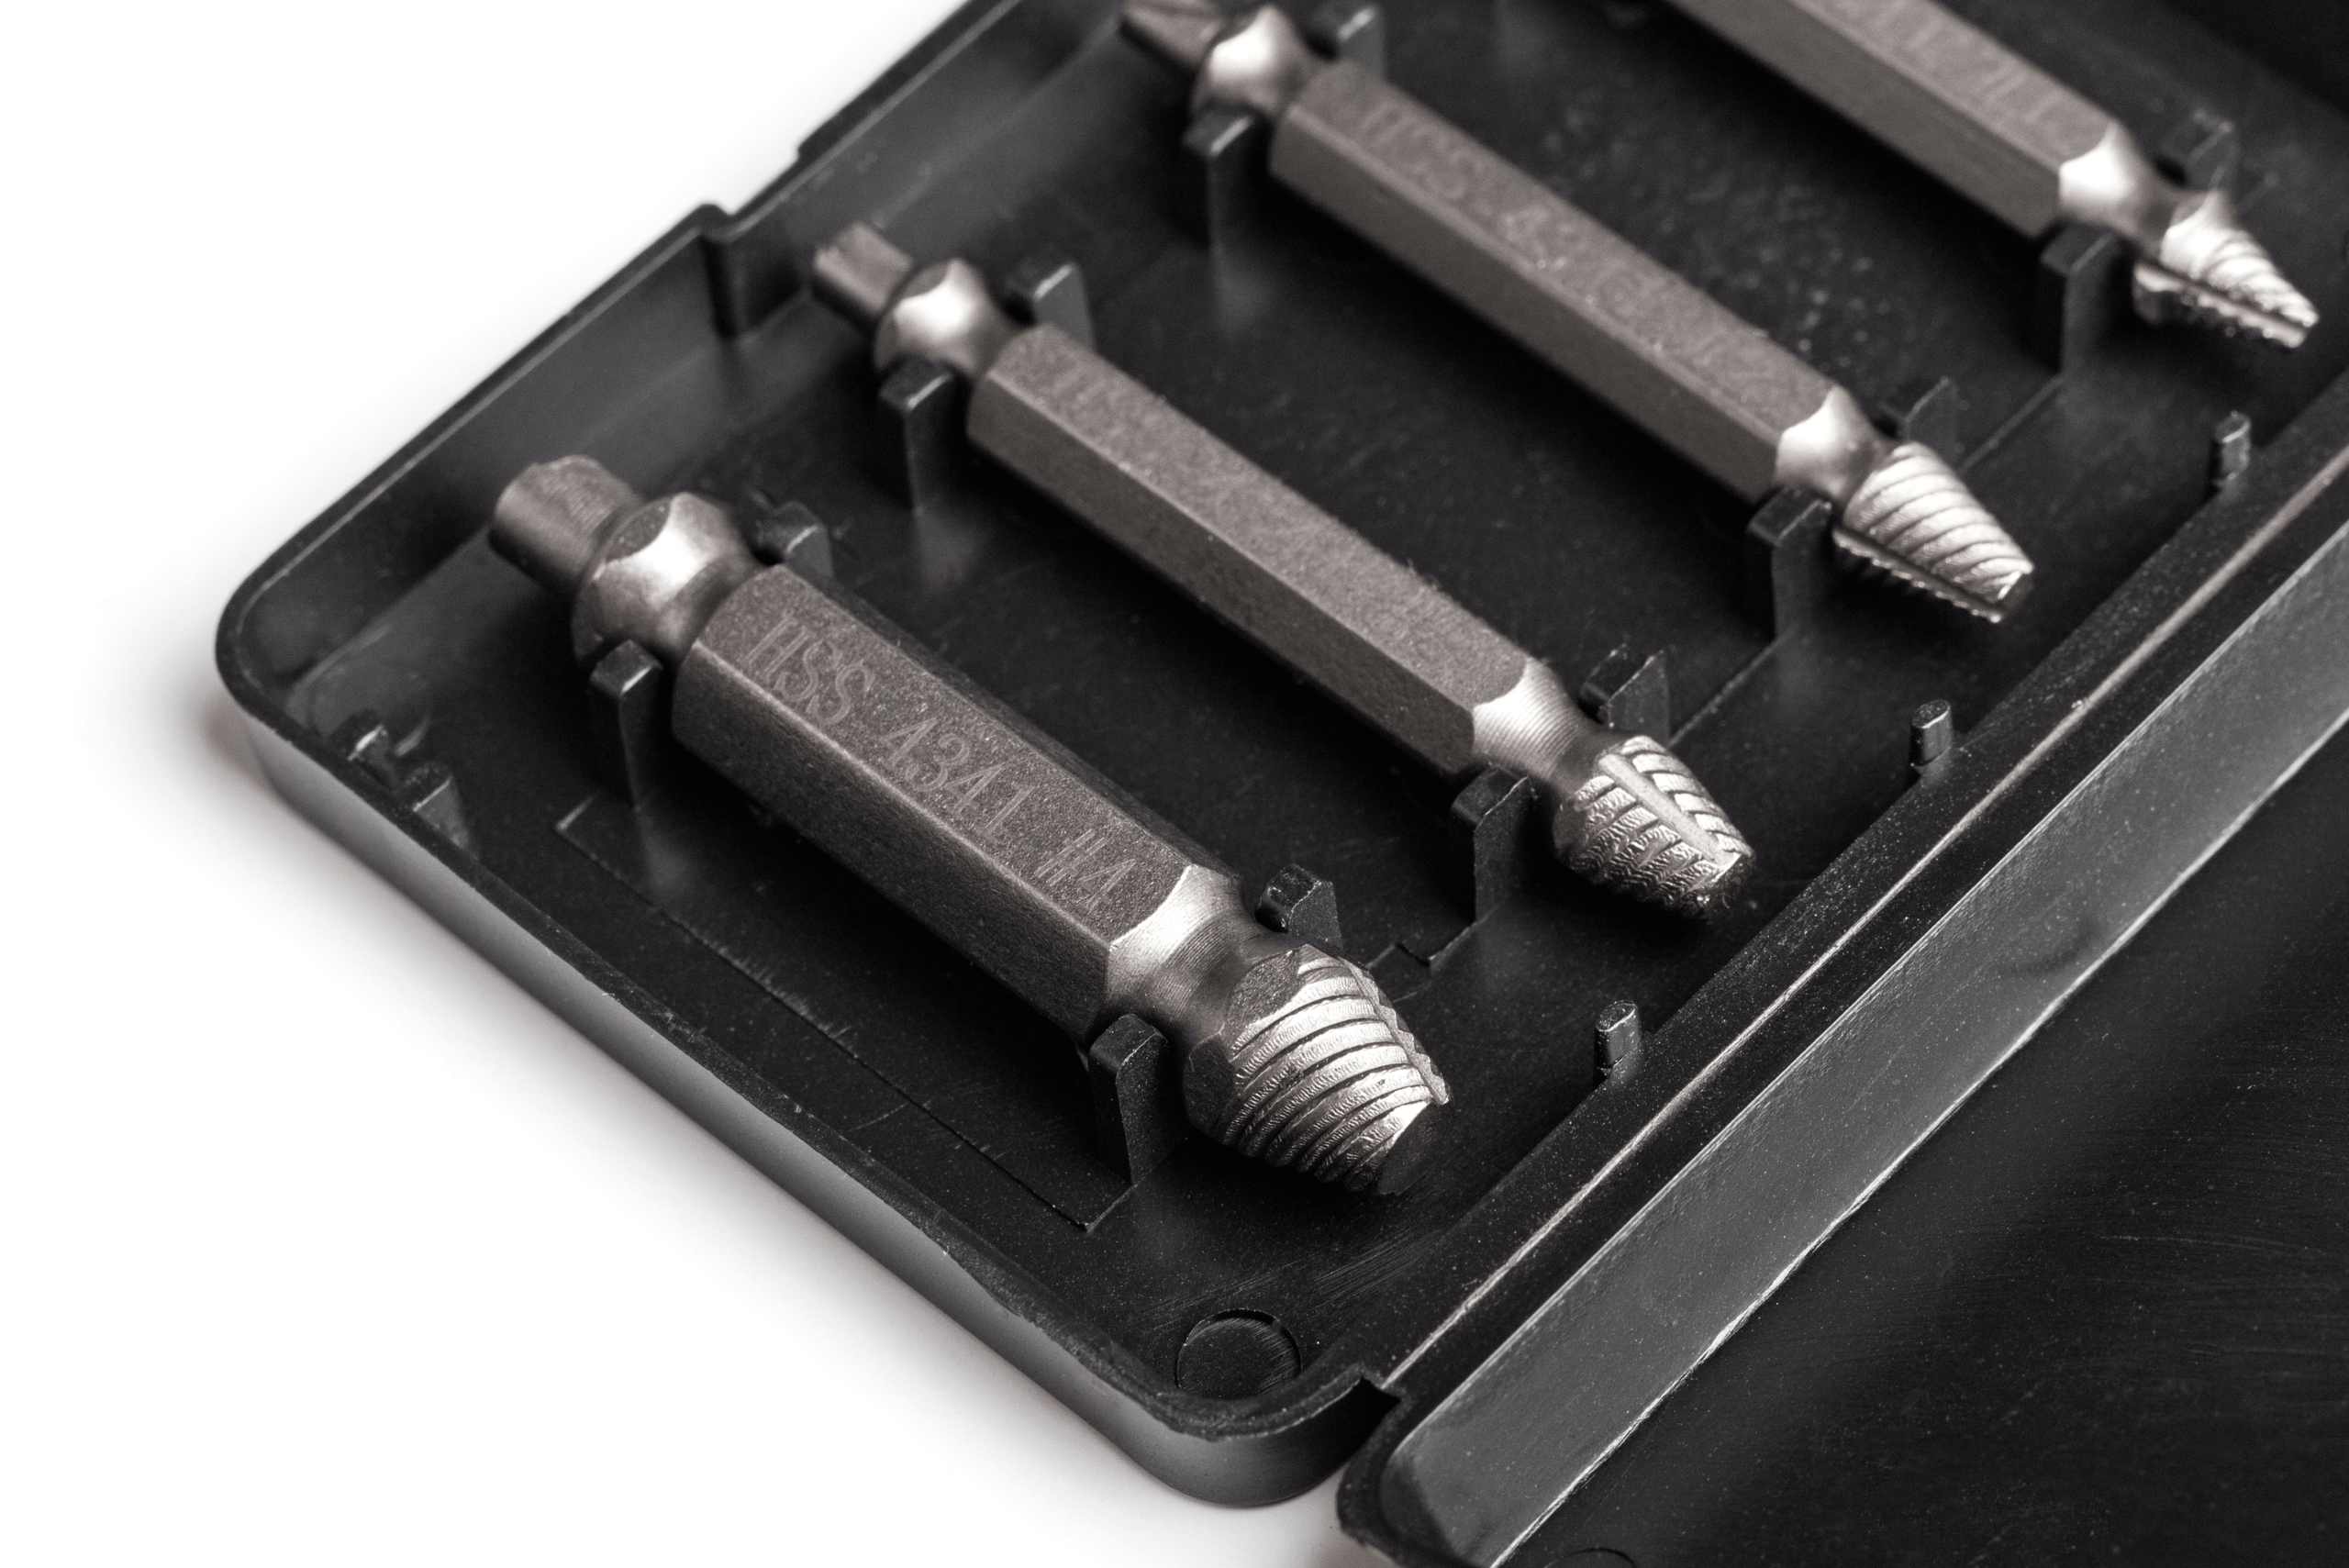 A set of screw extractors in a black plastic holder.